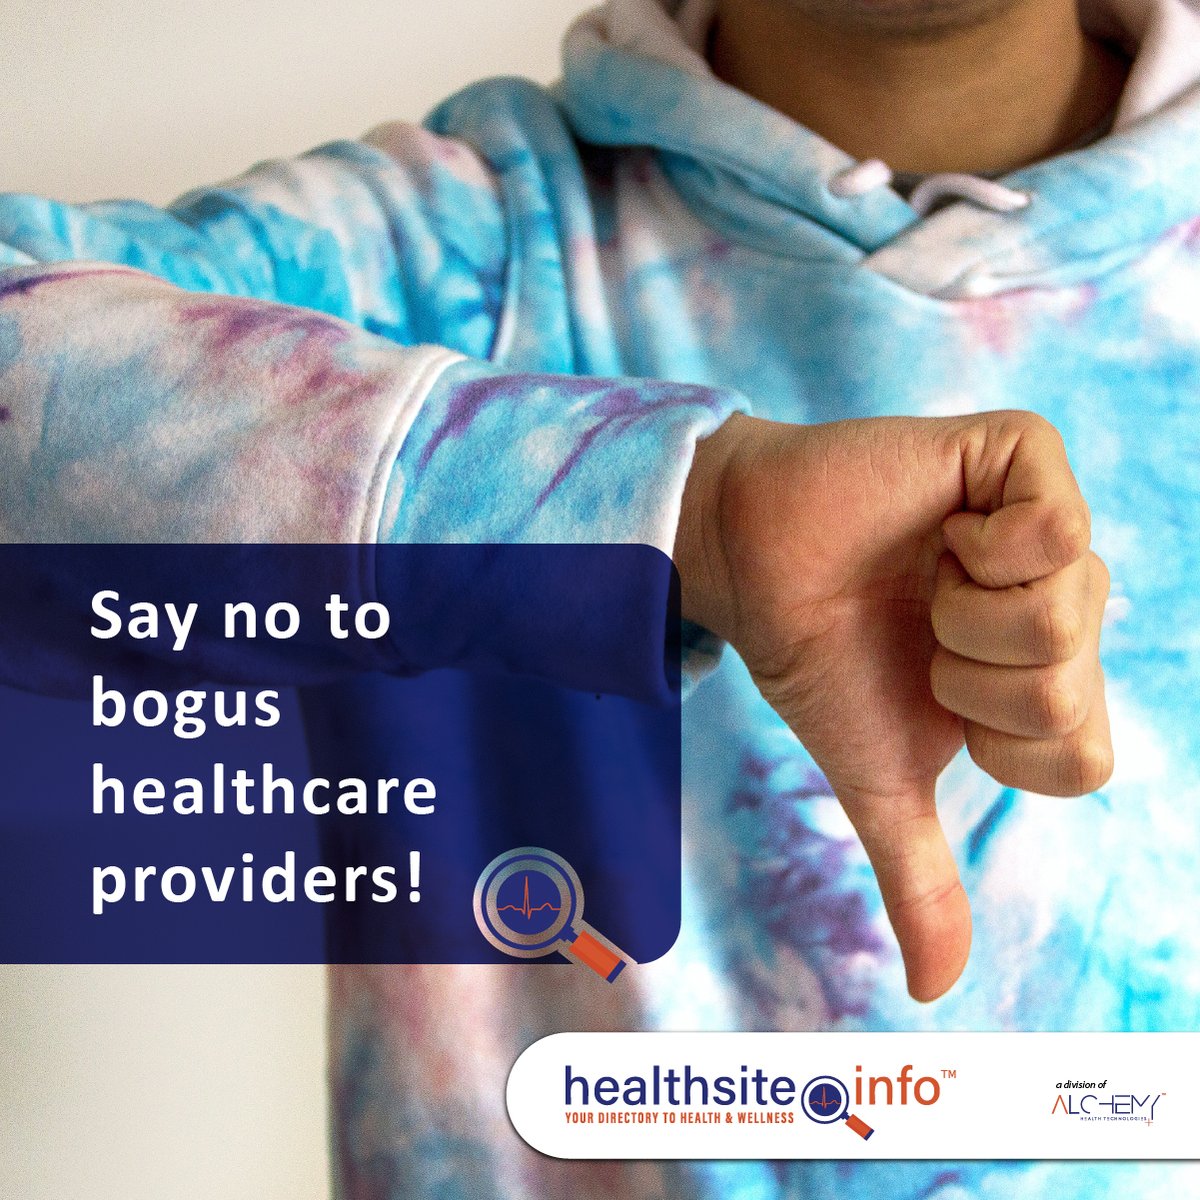 To access a trusted online directory of verified healthcare practitioners, go to 
healthsite.info

#OnlineDirectory #HealthcareDirectory #HealthcareAccess #HealthcareIndustry #AccessibleHealthcare #Doctors #GPReferral #DoctorReferral #DrNearMe #FindADrNearMe